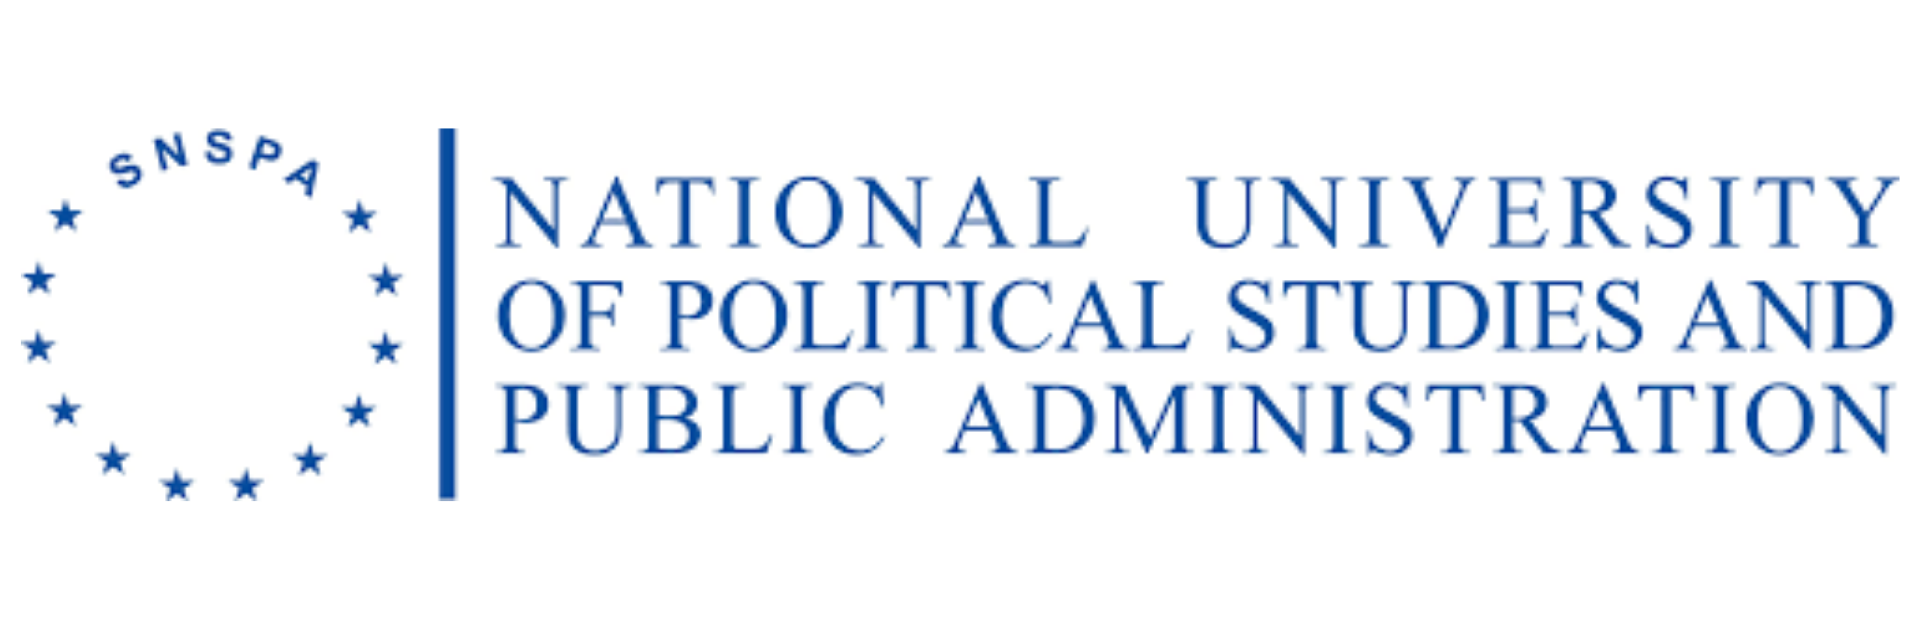 National University of Political Studies and Public Administration 